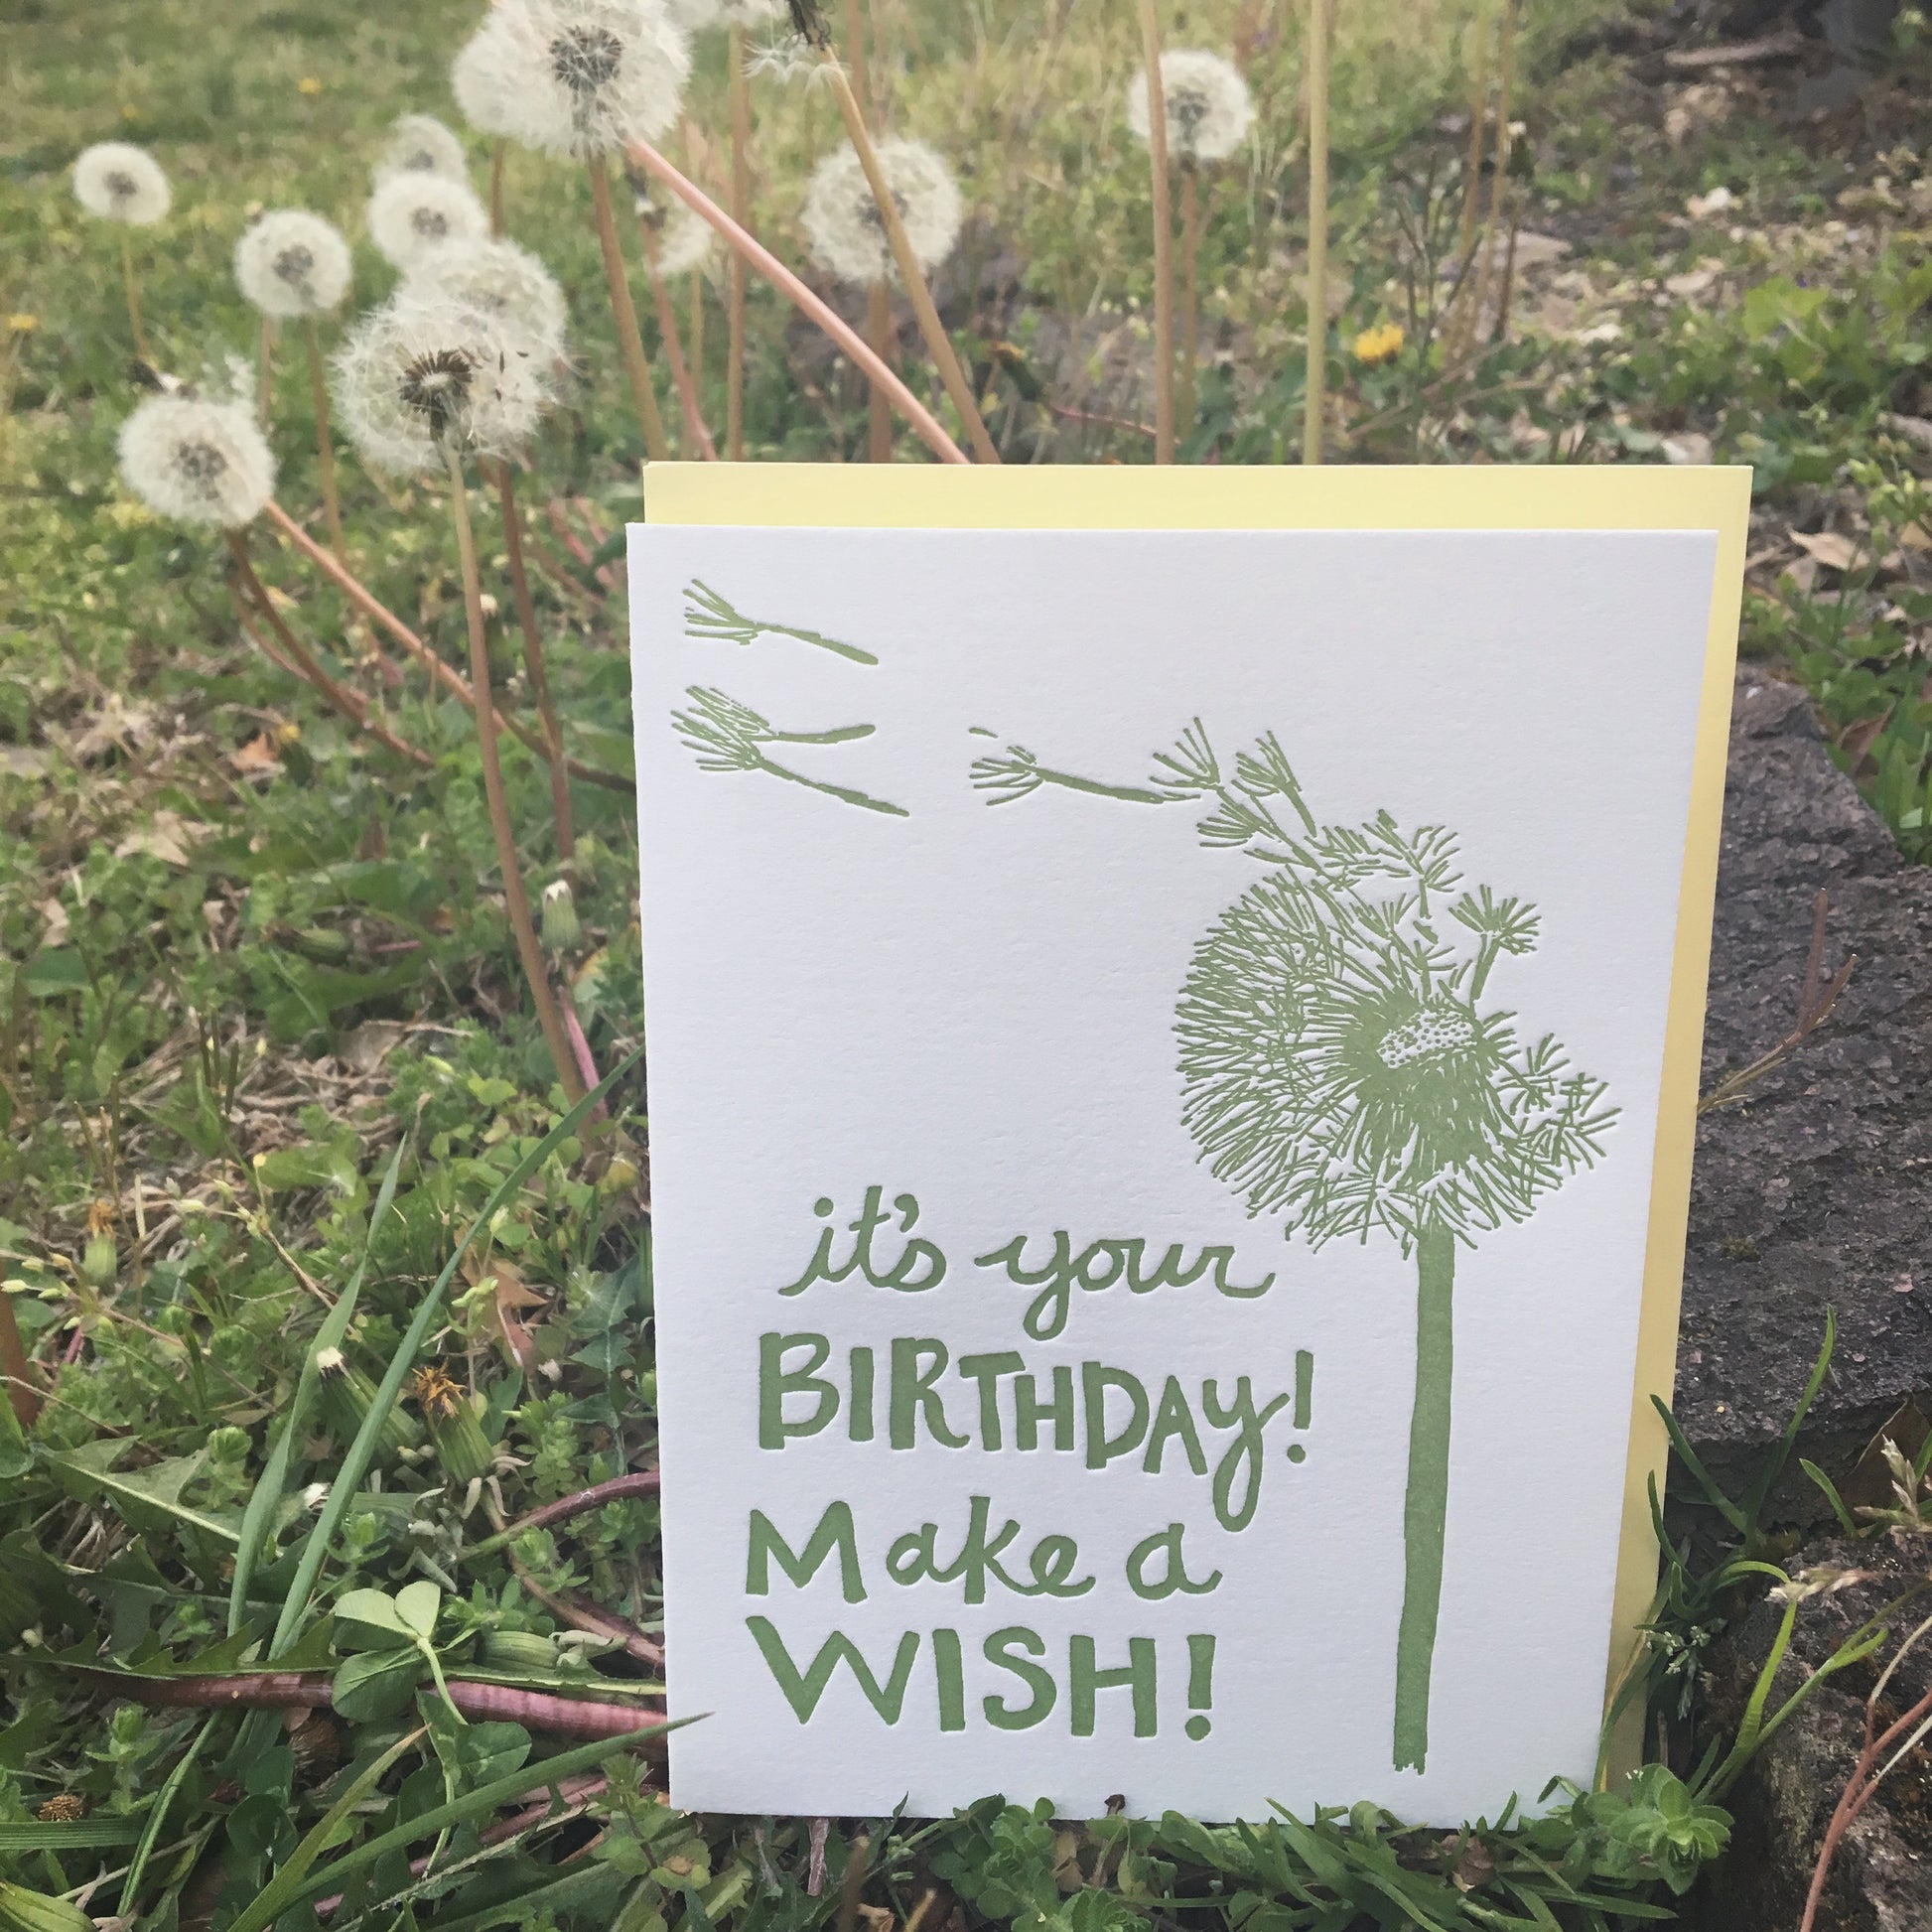 Letterpress greeting card featuring a hand-drawn dandelion printed in an earthy sage green ink. The bottom left of the card says "It's your birthday! Make a wish!" in a whimsical hand-drawn text, in the same earthy sage green ink. The card is white, blank inside, and is paired with a soft yellow envelope. Card is shown in front of a cluster of dandelion puffs outside on a spring day.